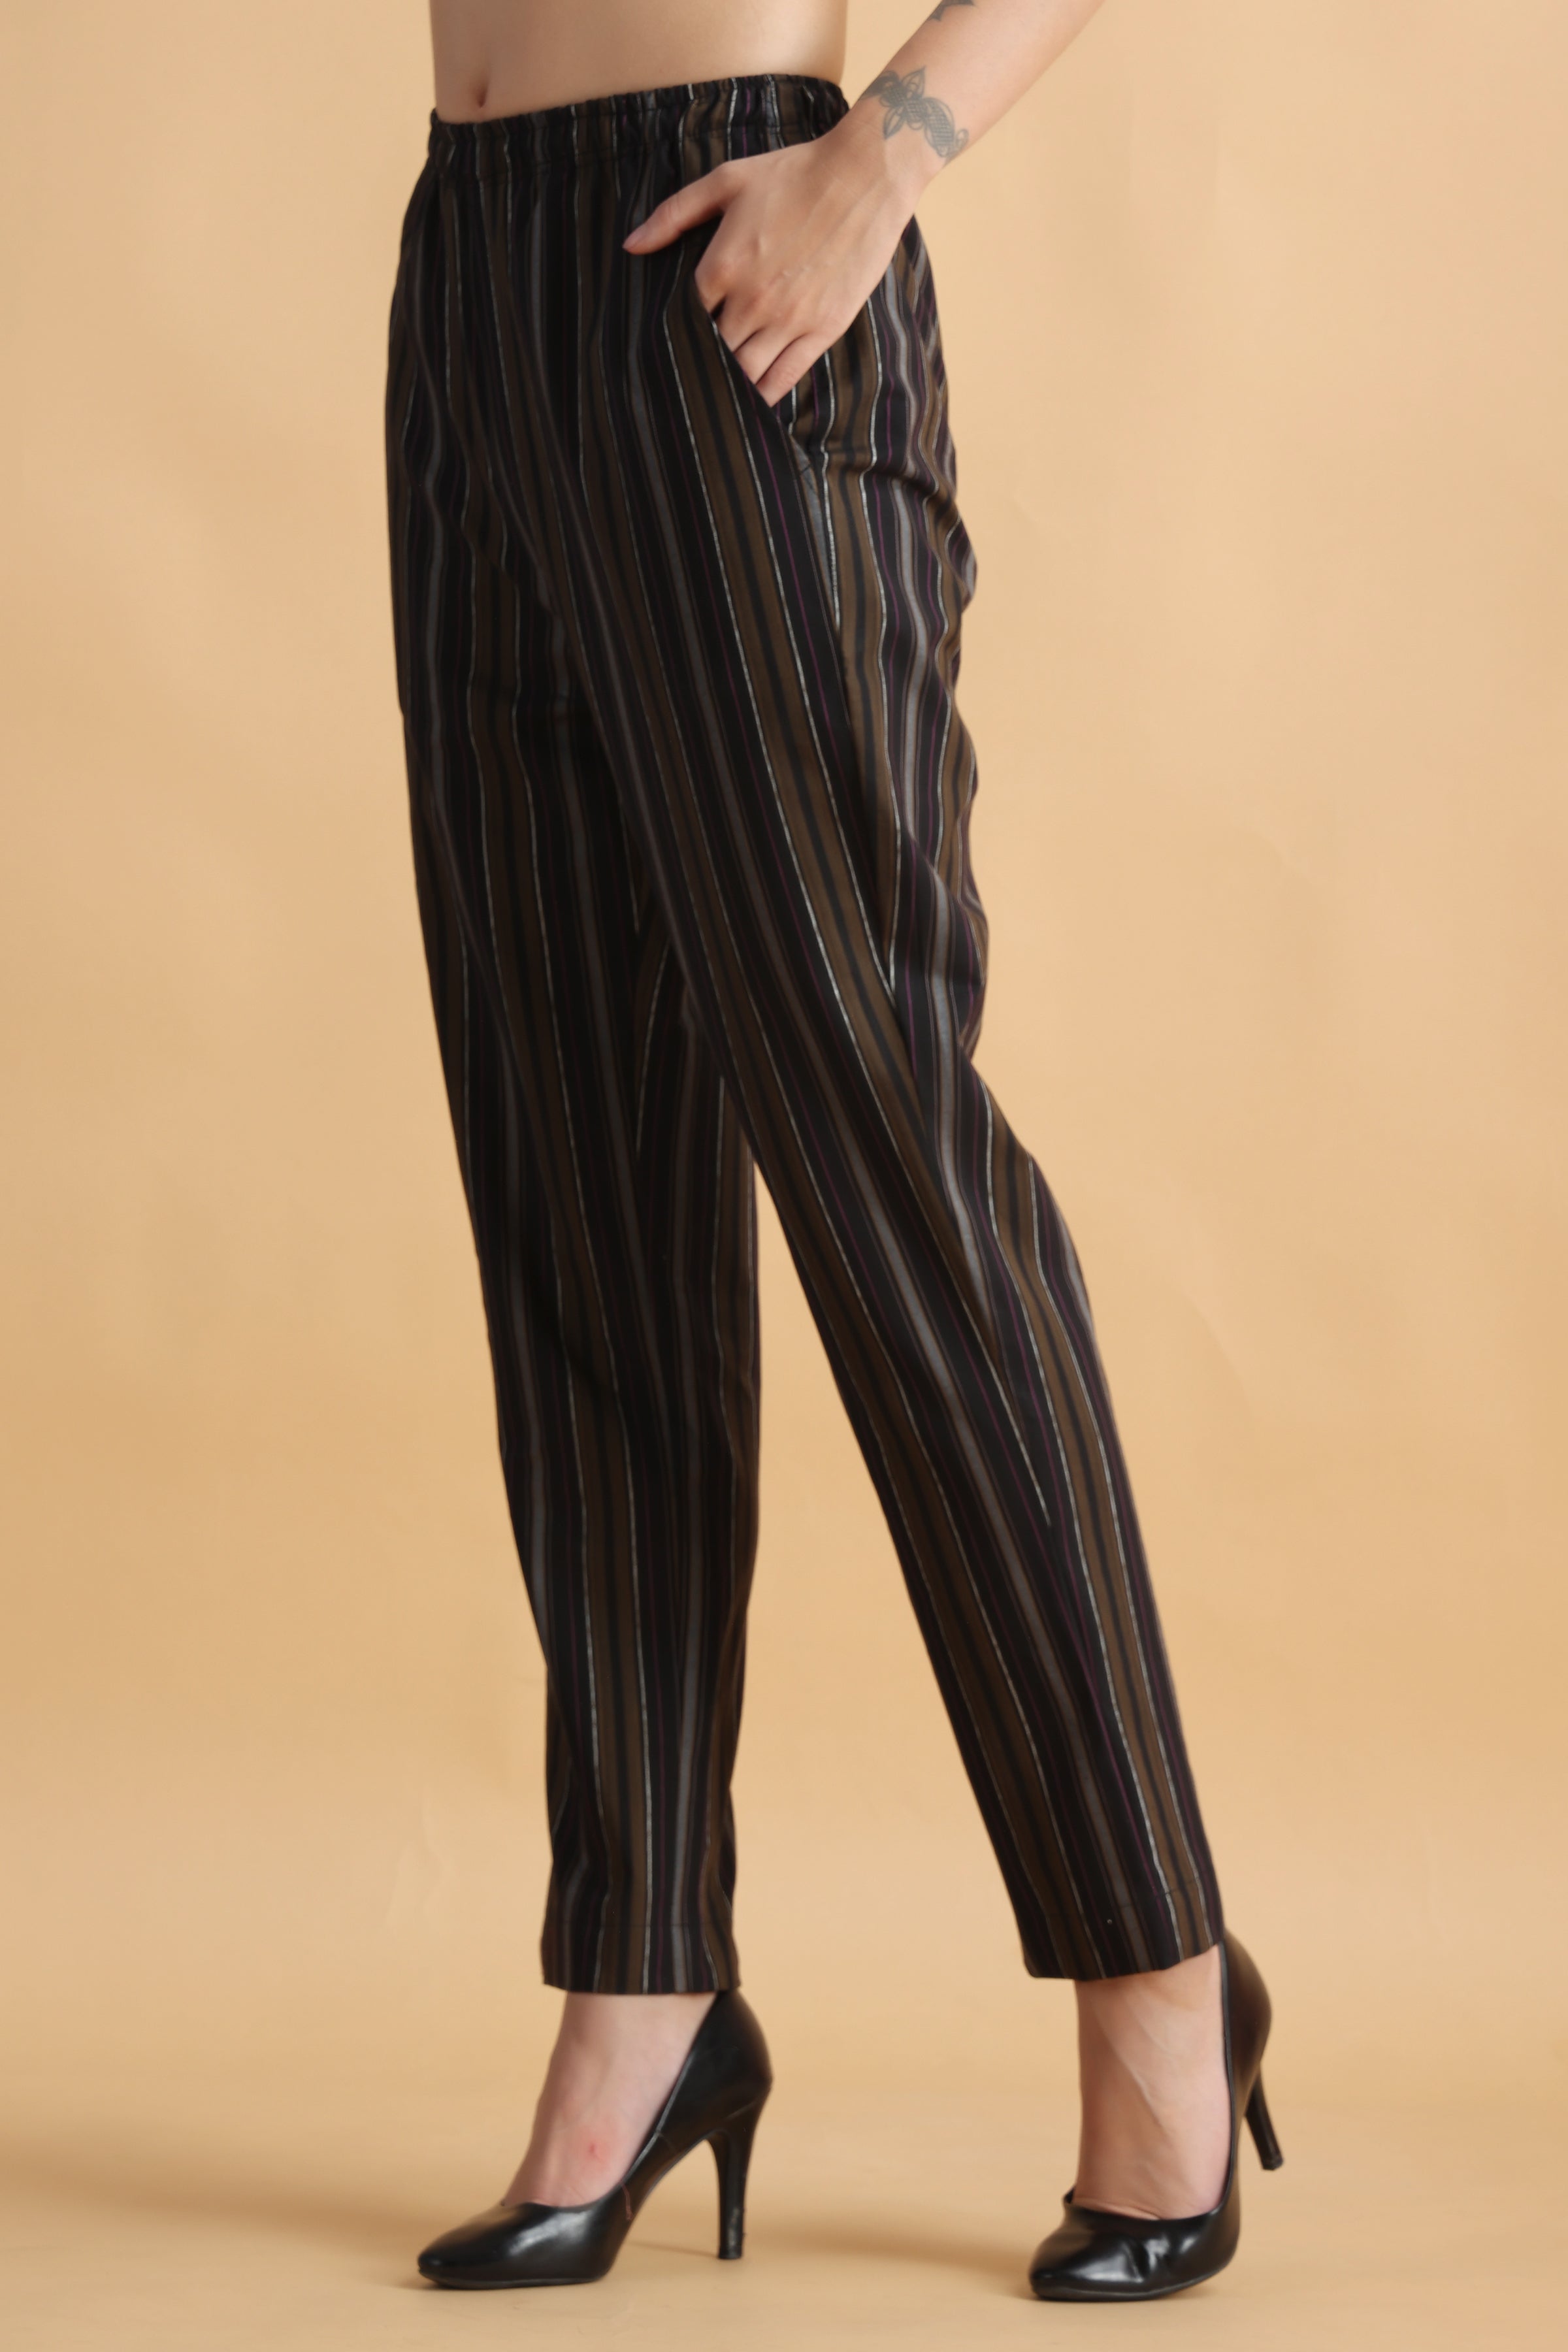 Buy Online Women Stylish Black Striped Volume Play Trousers at best price   Plussin